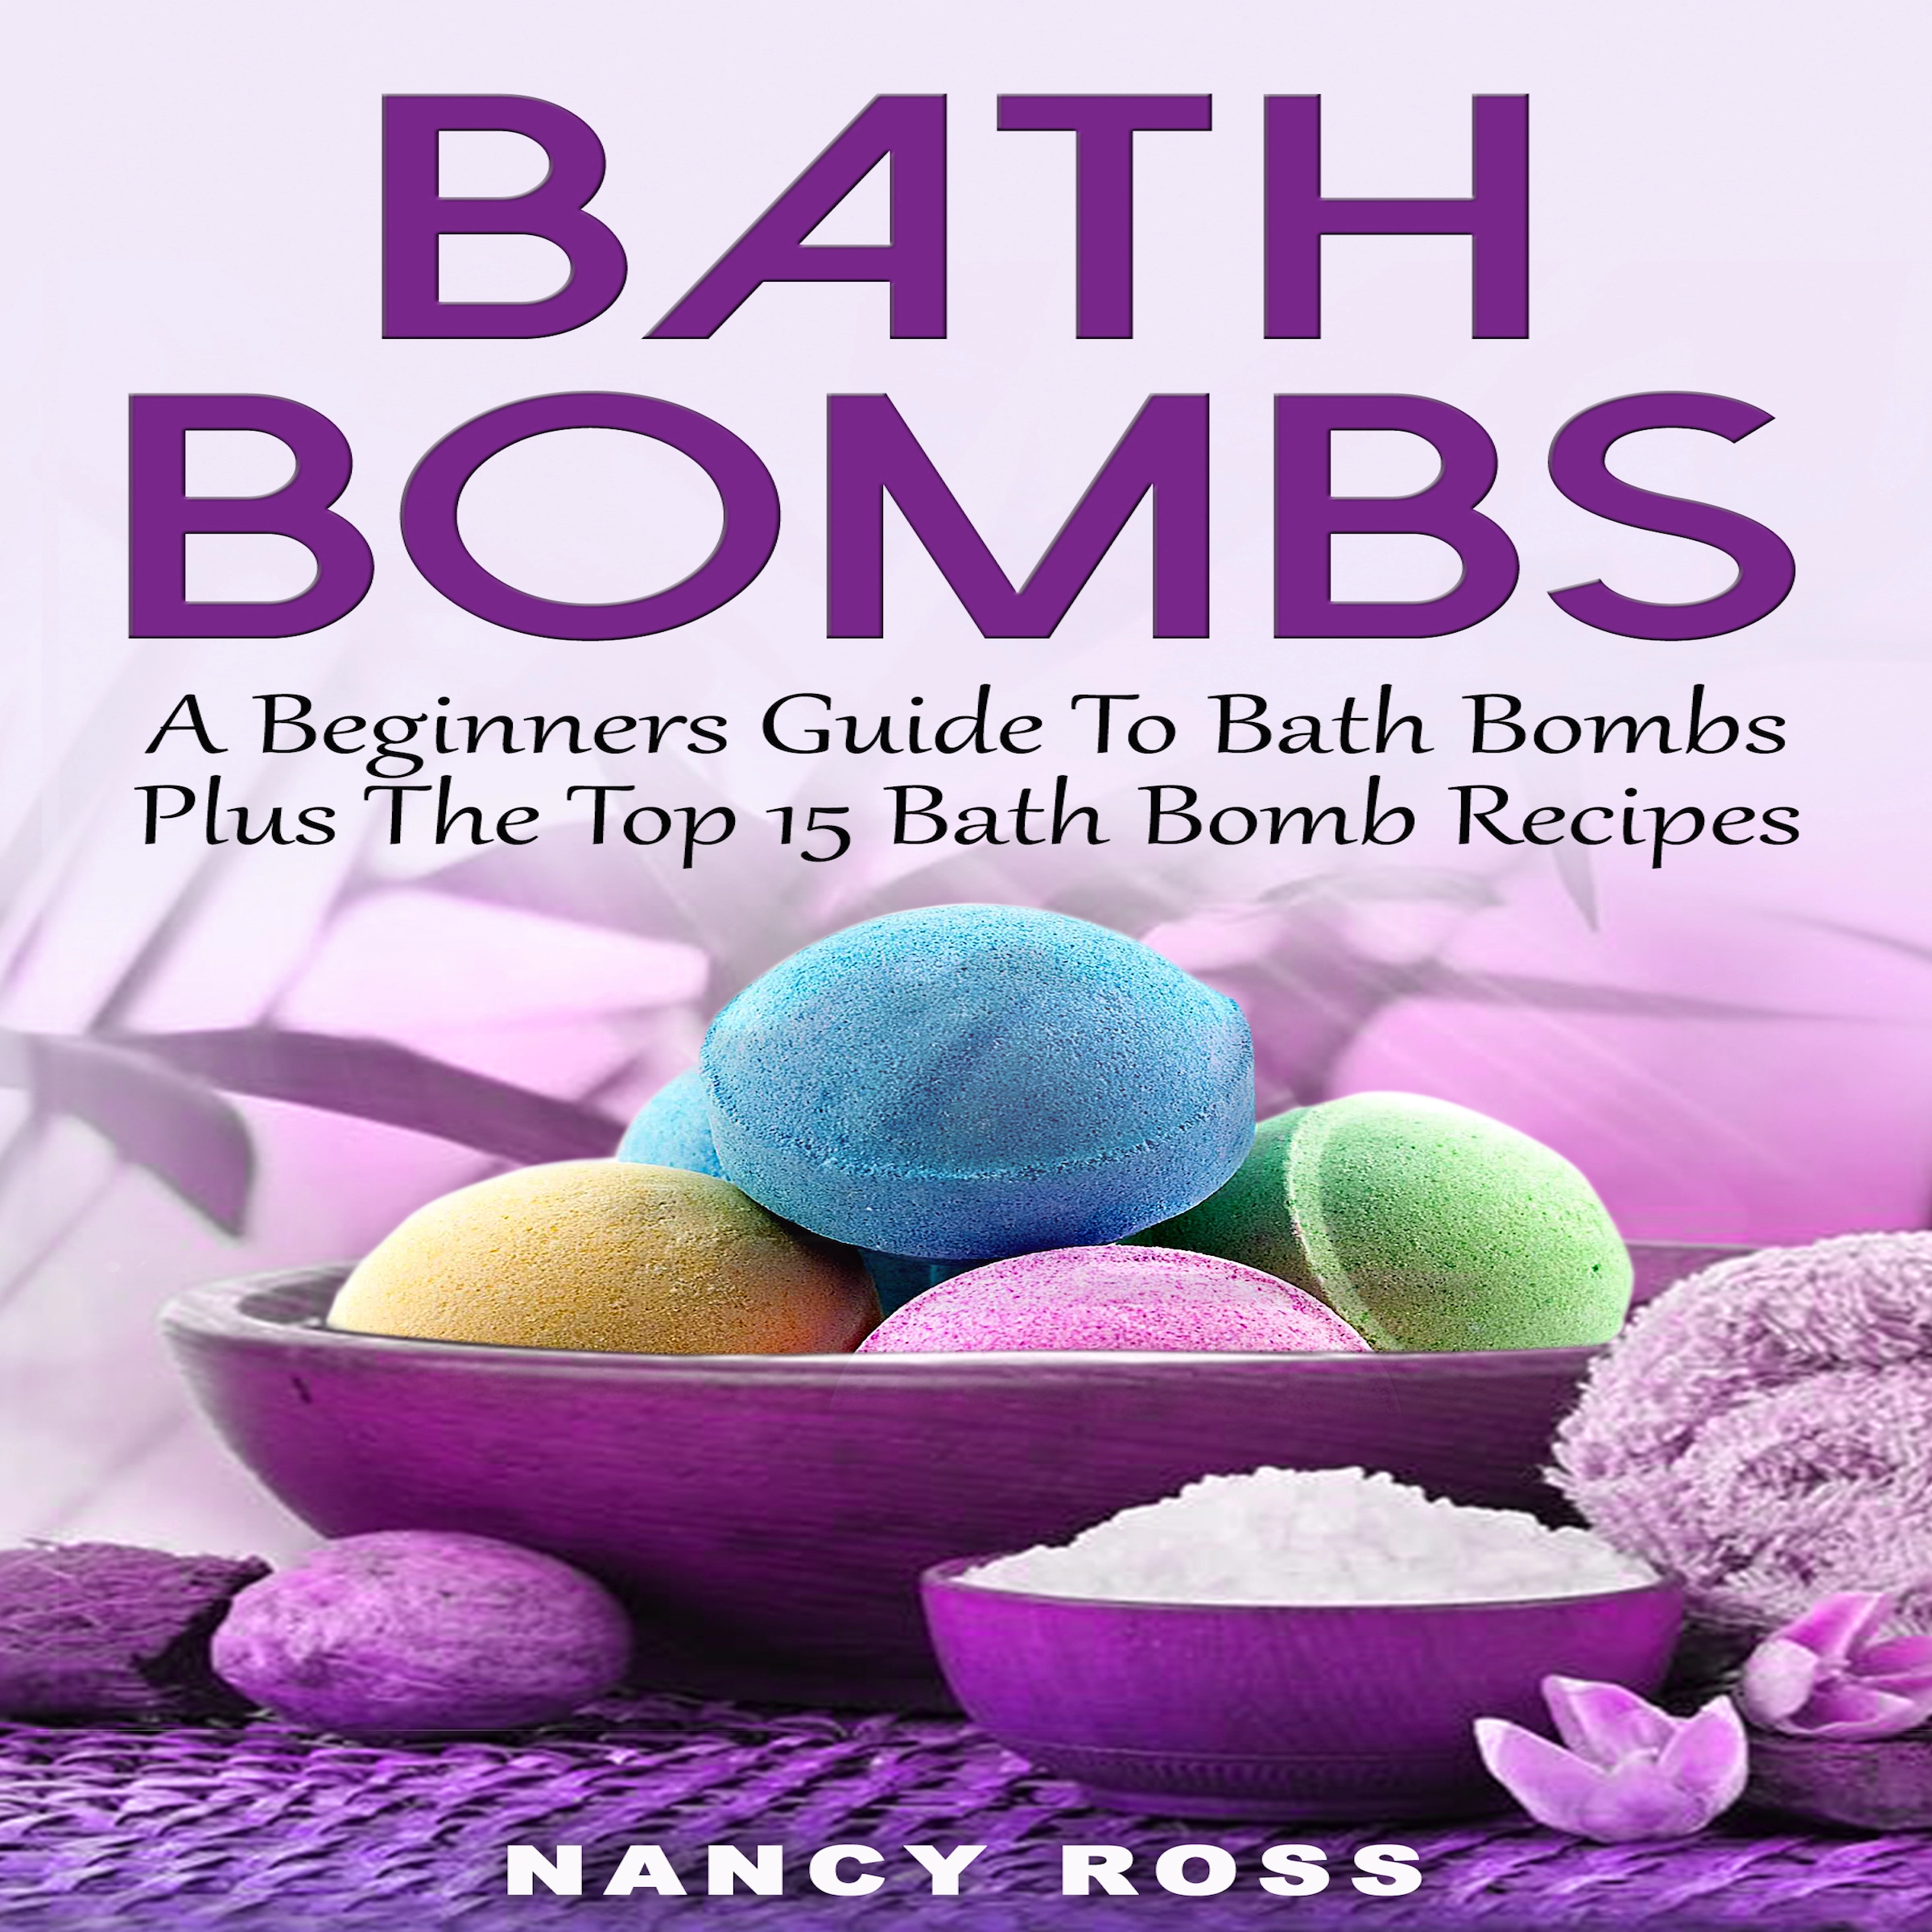 Bath Bombs: A Beginners Guide To Bath Bombs Plus The Top 15 Bath Bomb Recipes Audiobook by Nancy Ross